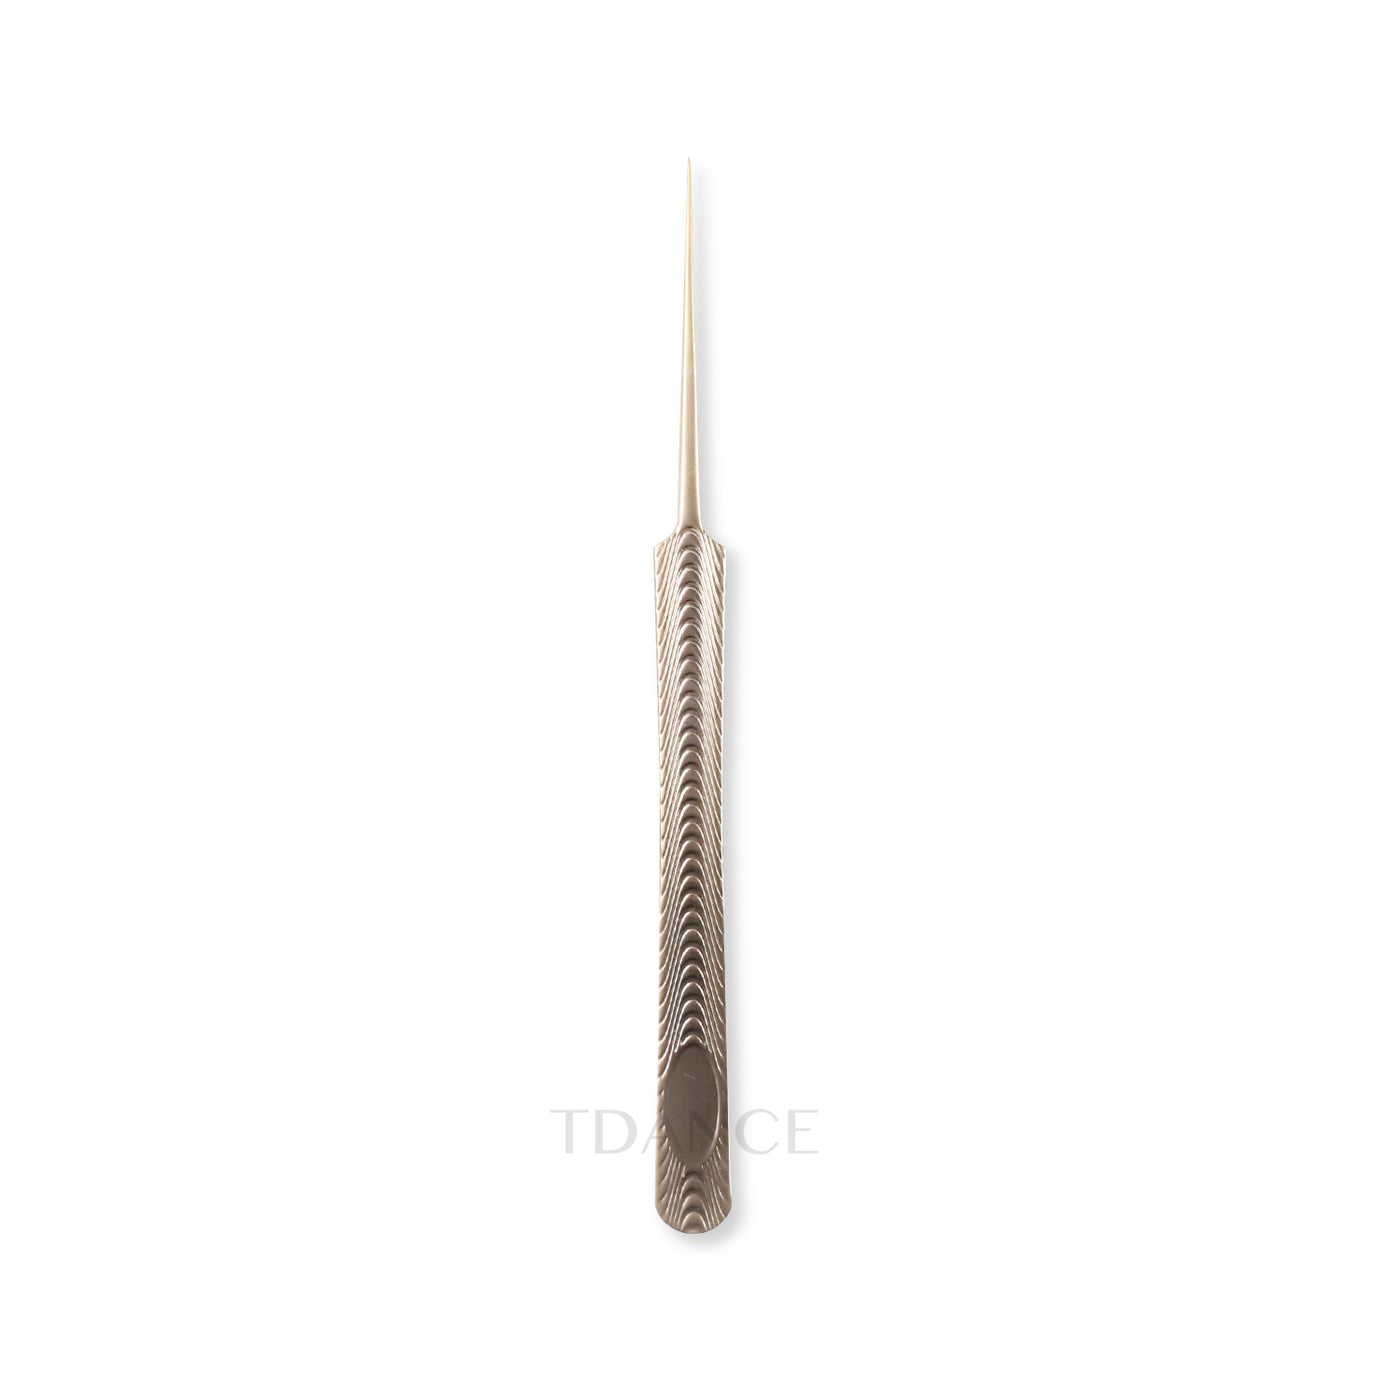 TF-09 Fish Scale Gold Tweezers For Eyelash Extension